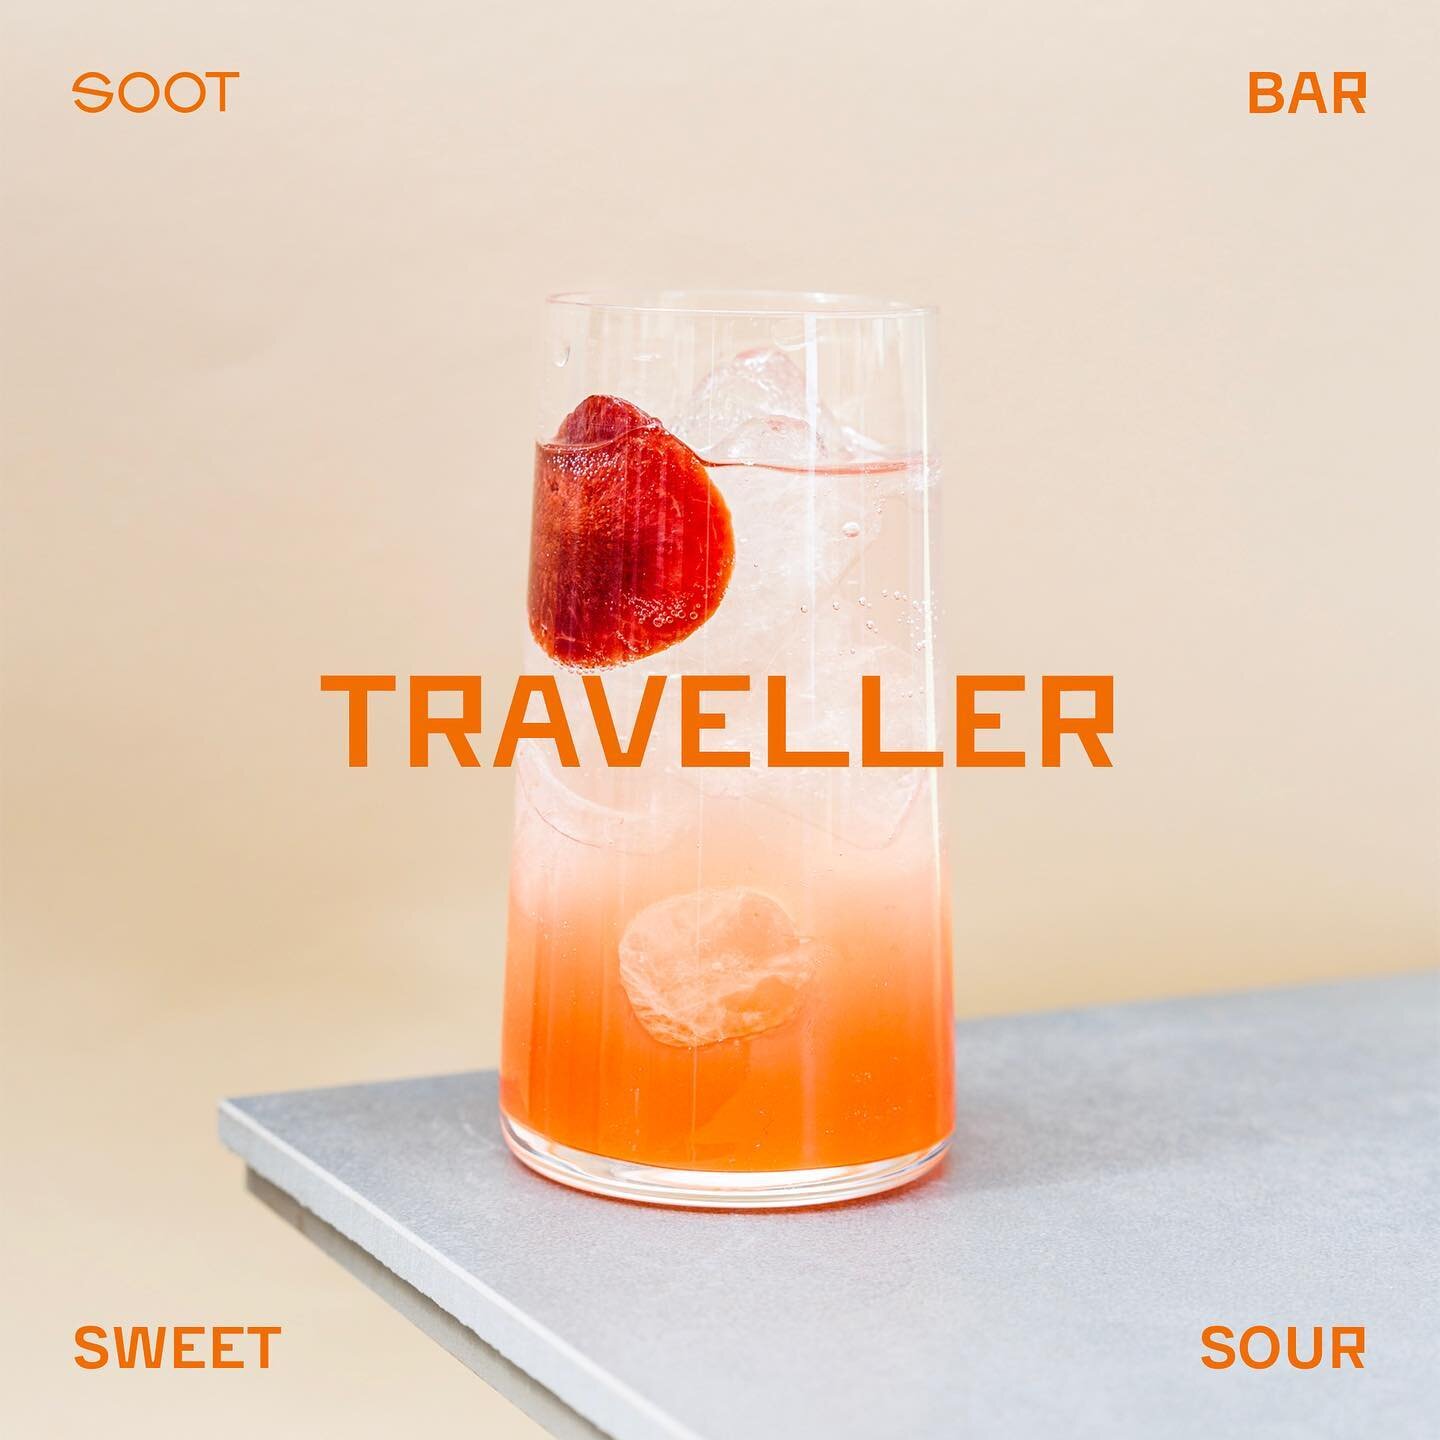 Feeling adventurous? Then this drink is made just for you. 

Where else on Earth could you have coconut oil fat-washed rum with plum and orange cordial? Now you can check it off your bucket list and get excited for new quests.